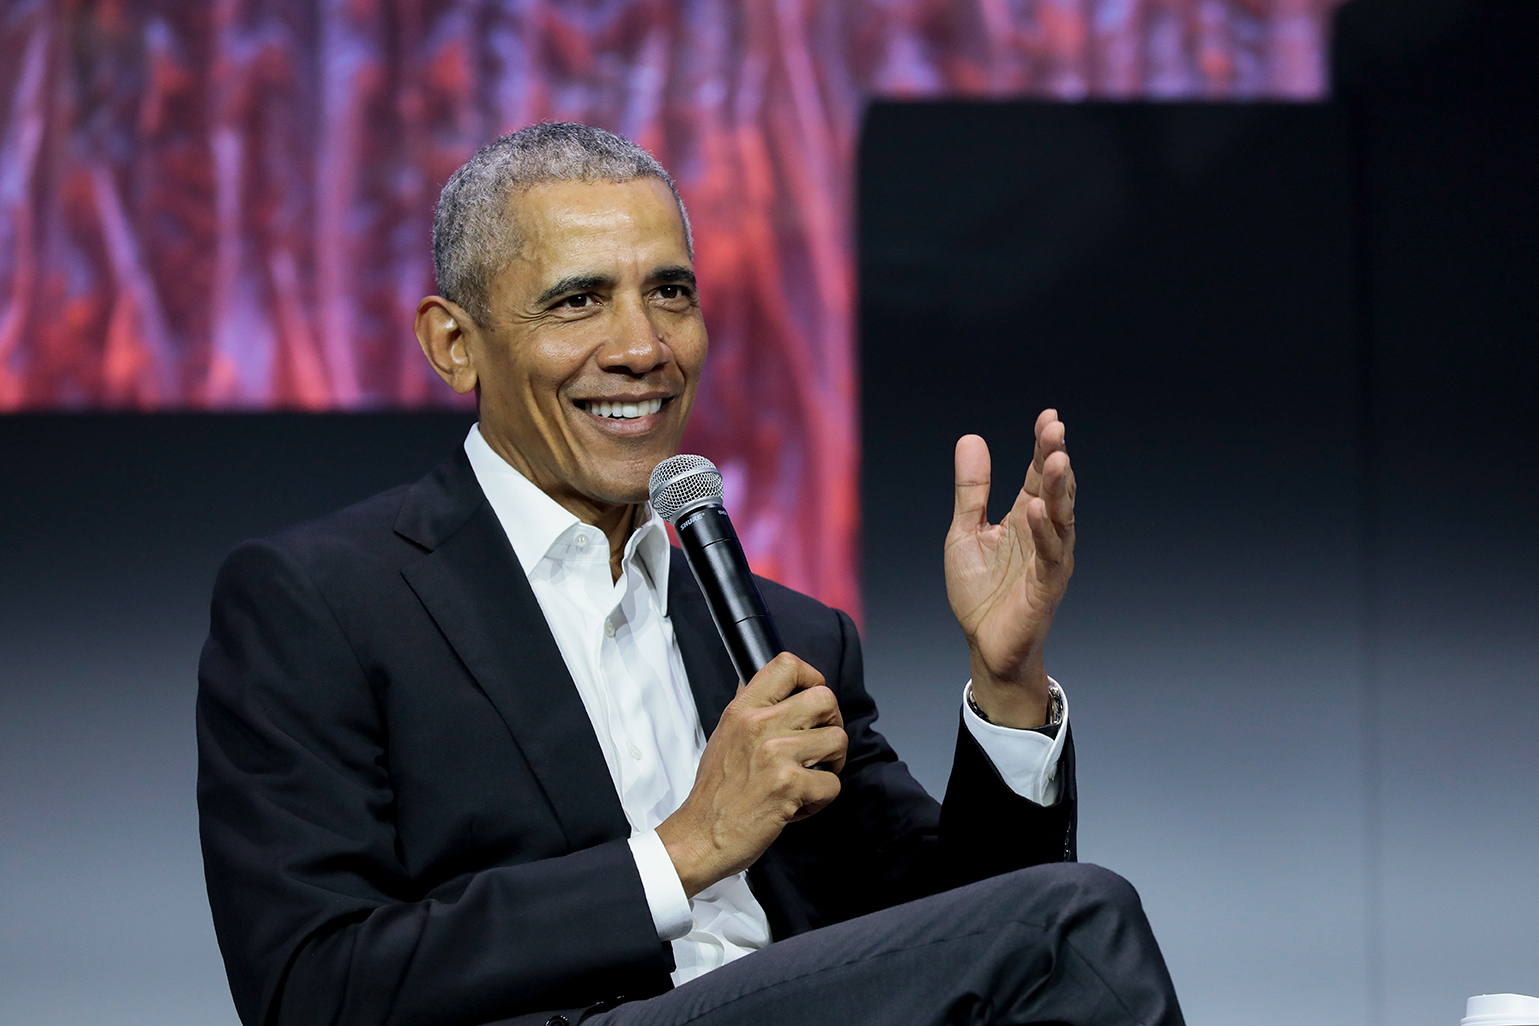 President obama sits holding a microphone giving a keynote talk at Greenbuild 2019